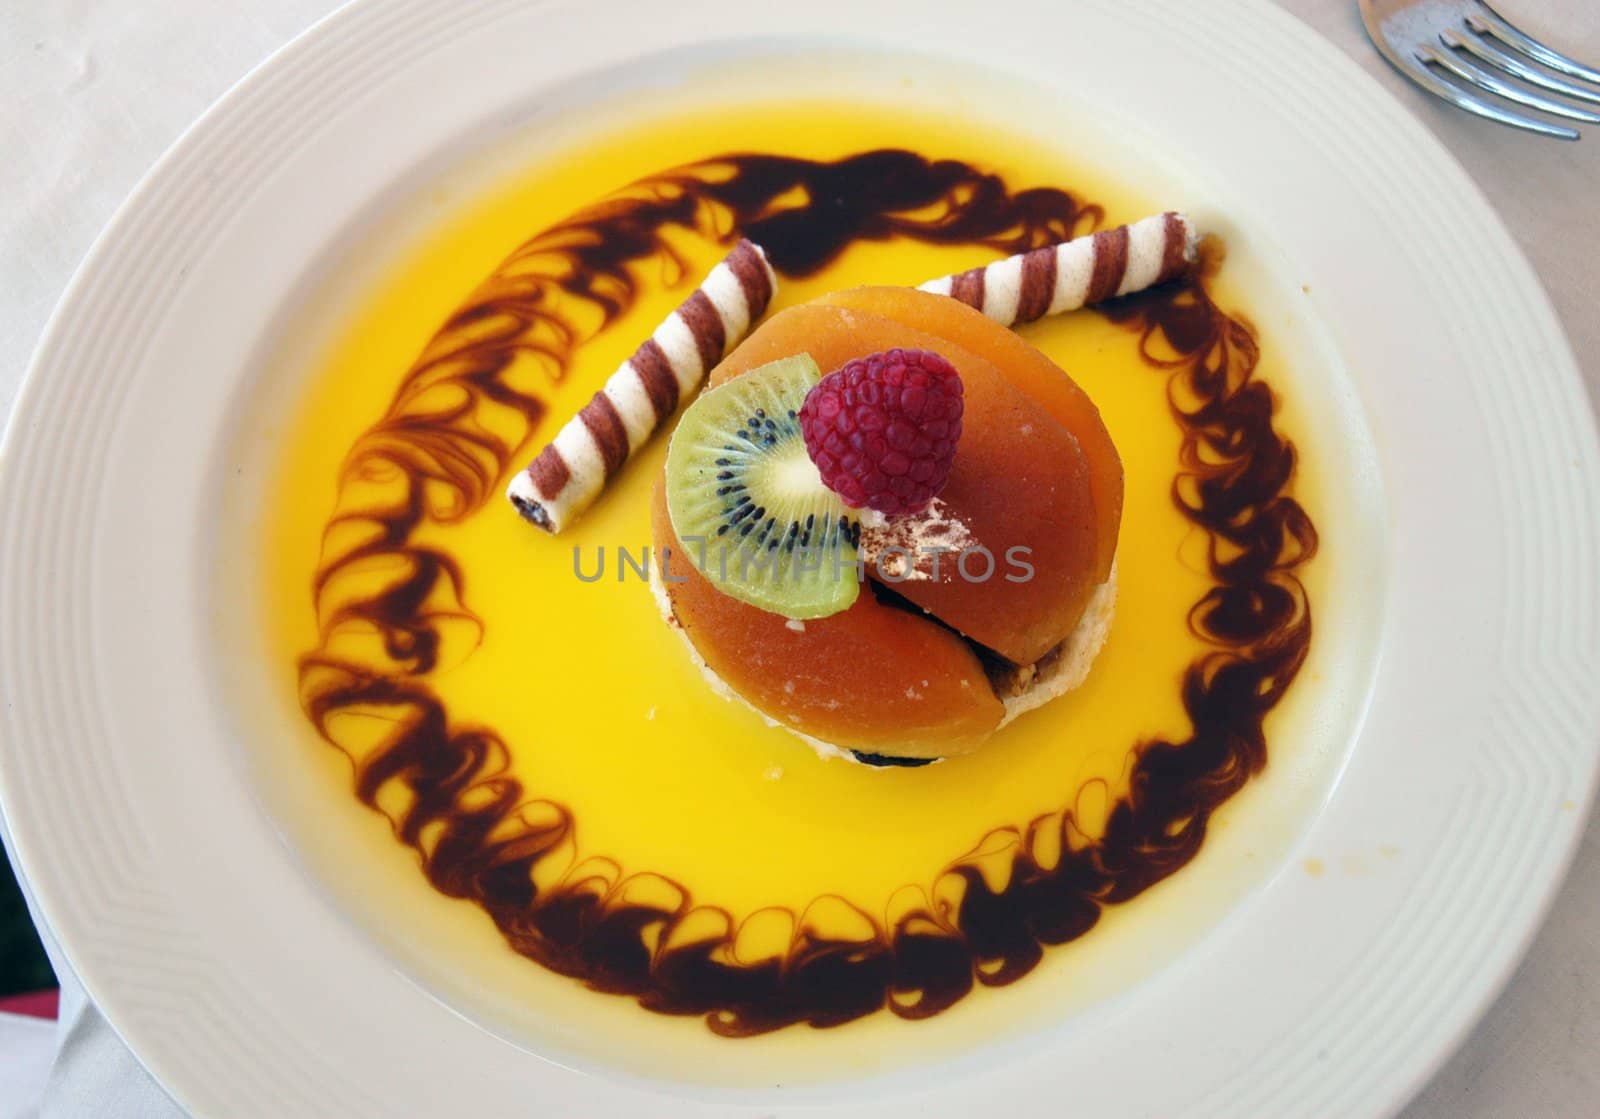 Sweet fruit dessert with yellow sauce on white plate